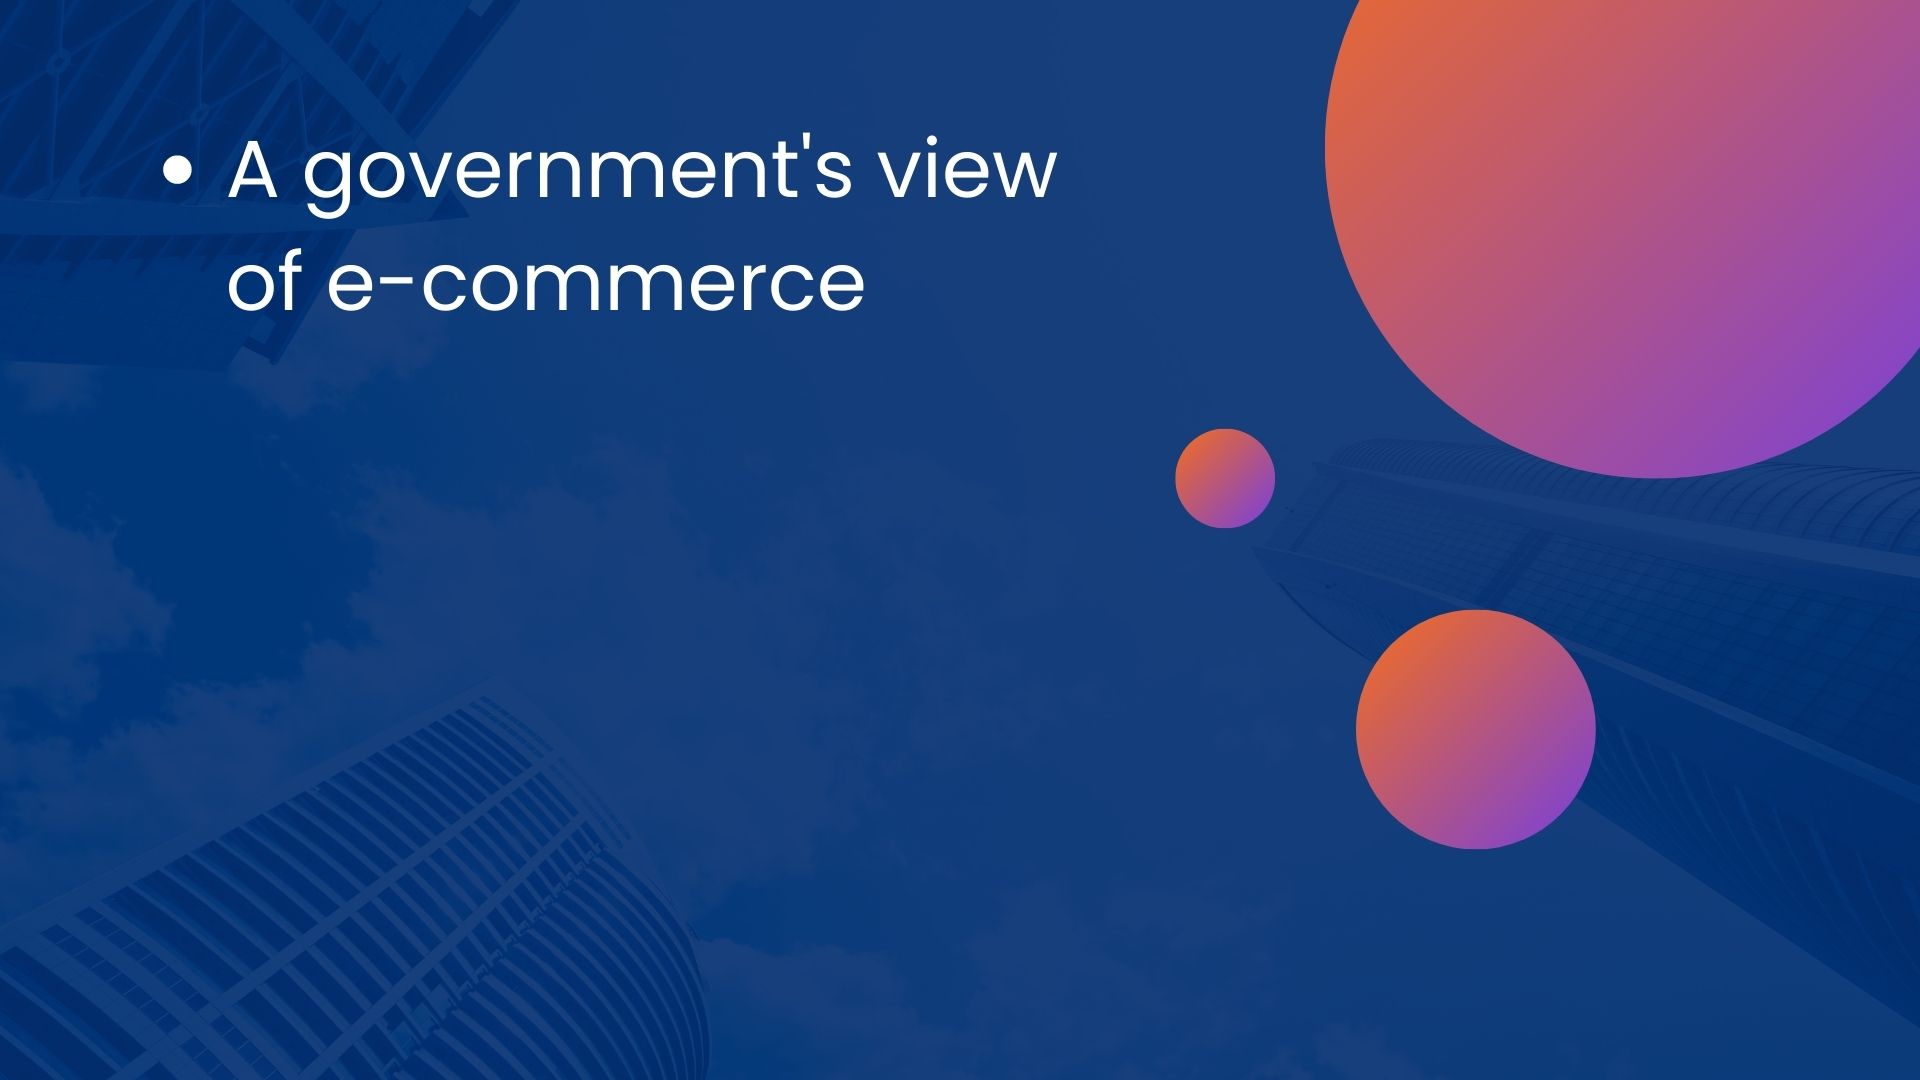 A government's view of e-commerce